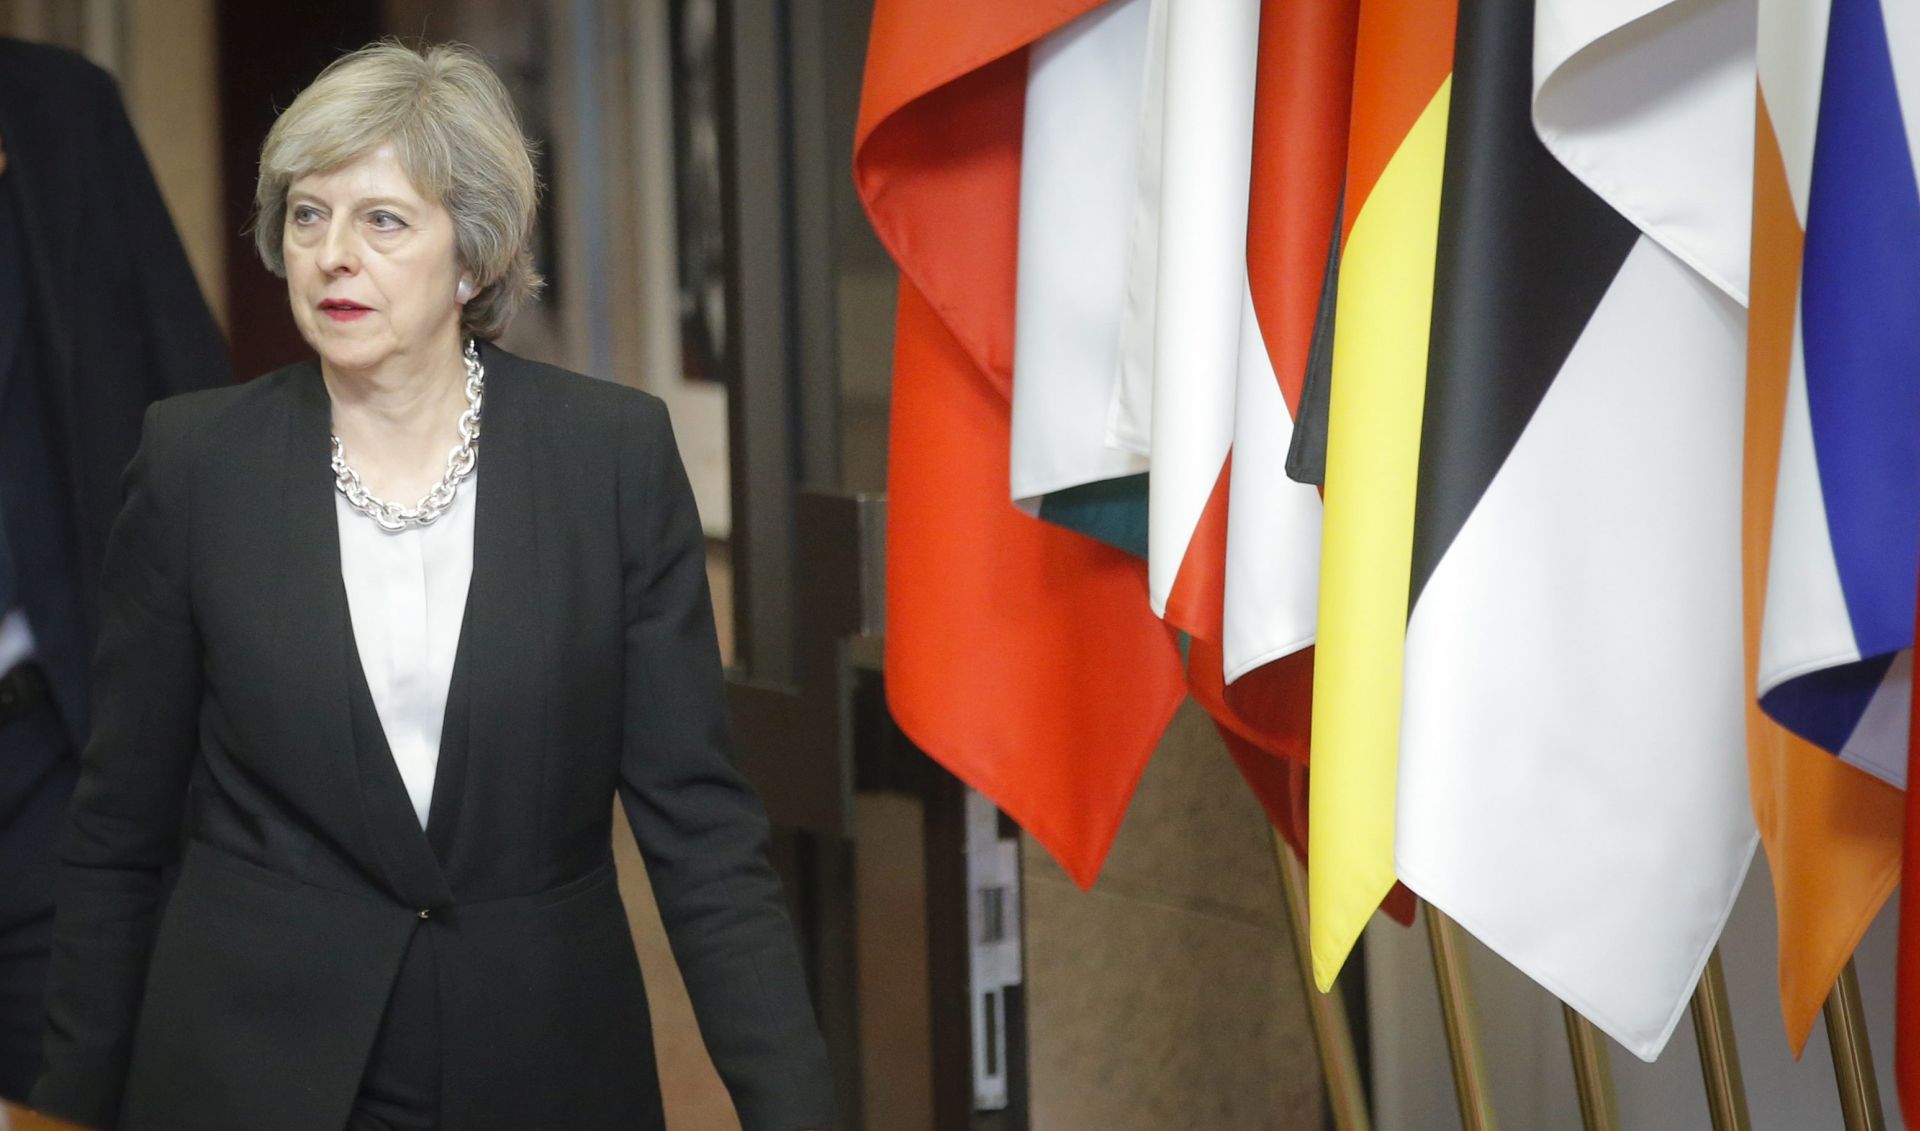 epa05677536 Britain's Prime Minister Theresa May leaves at the end of an European Summit in Brussels, Belgium, 15 December 2016. EU leaders meet for a one-day summit which will mainly focus on the implementation of the EU-Turkey agreement on migration and the EU Internal Security Strategy. 27 leaders are scheduled to later meet informally for a dinner to discuss the Brexit process.  EPA/OLIVIER HOSLET